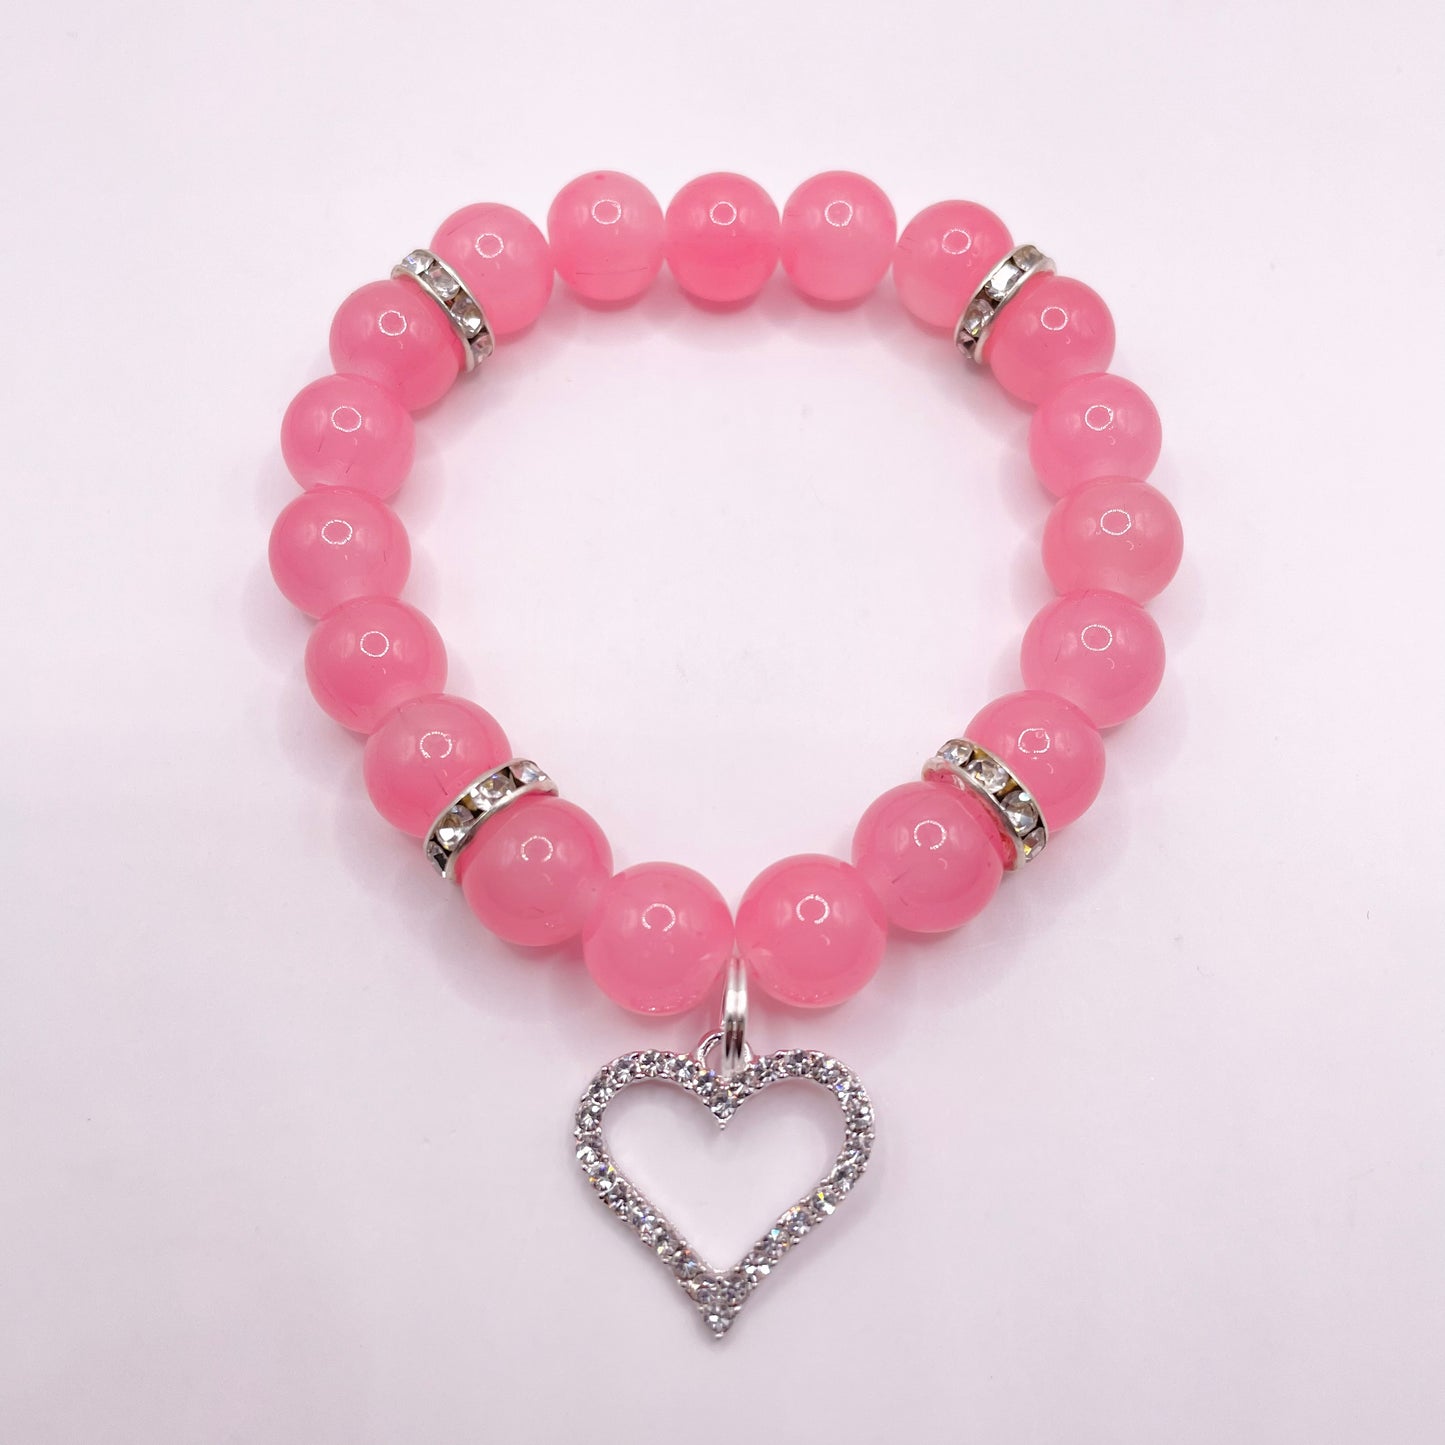 Pink bracelet with Silver Heart Charm